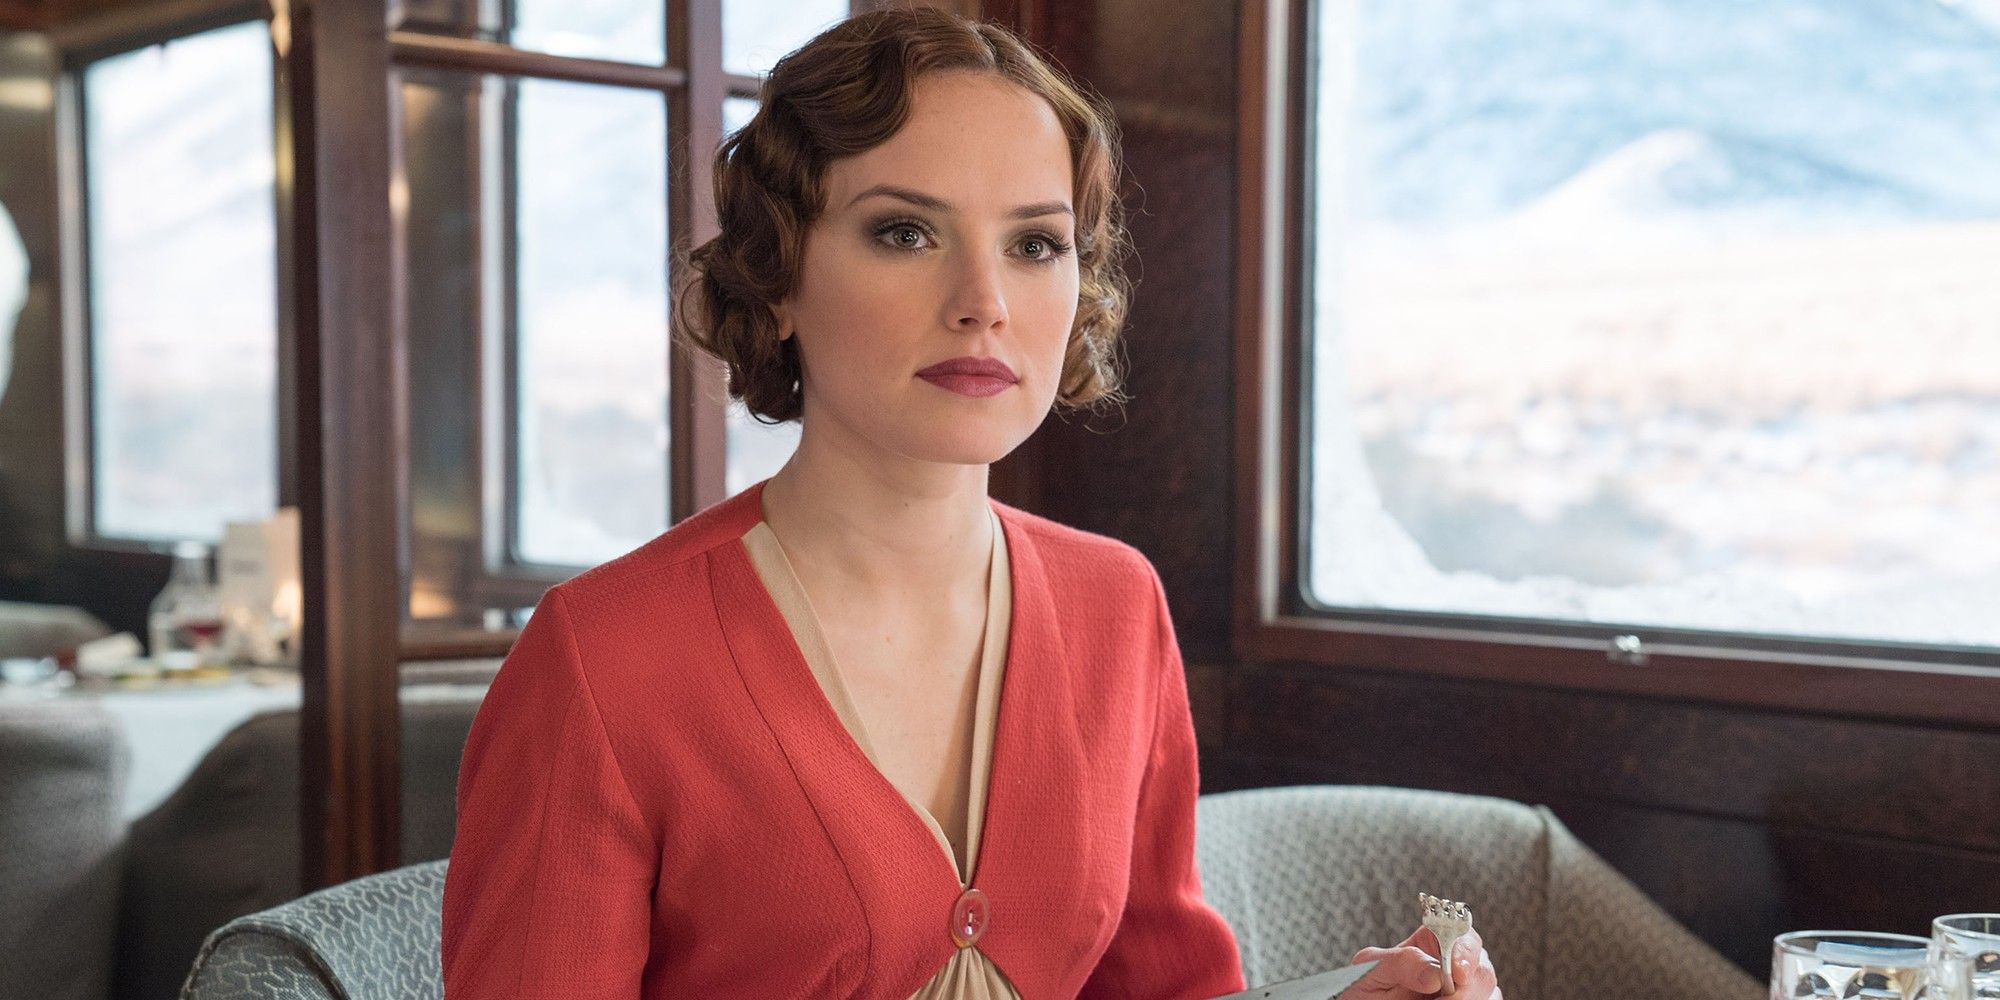 Daisy Ridley in Murder on the Orient Express